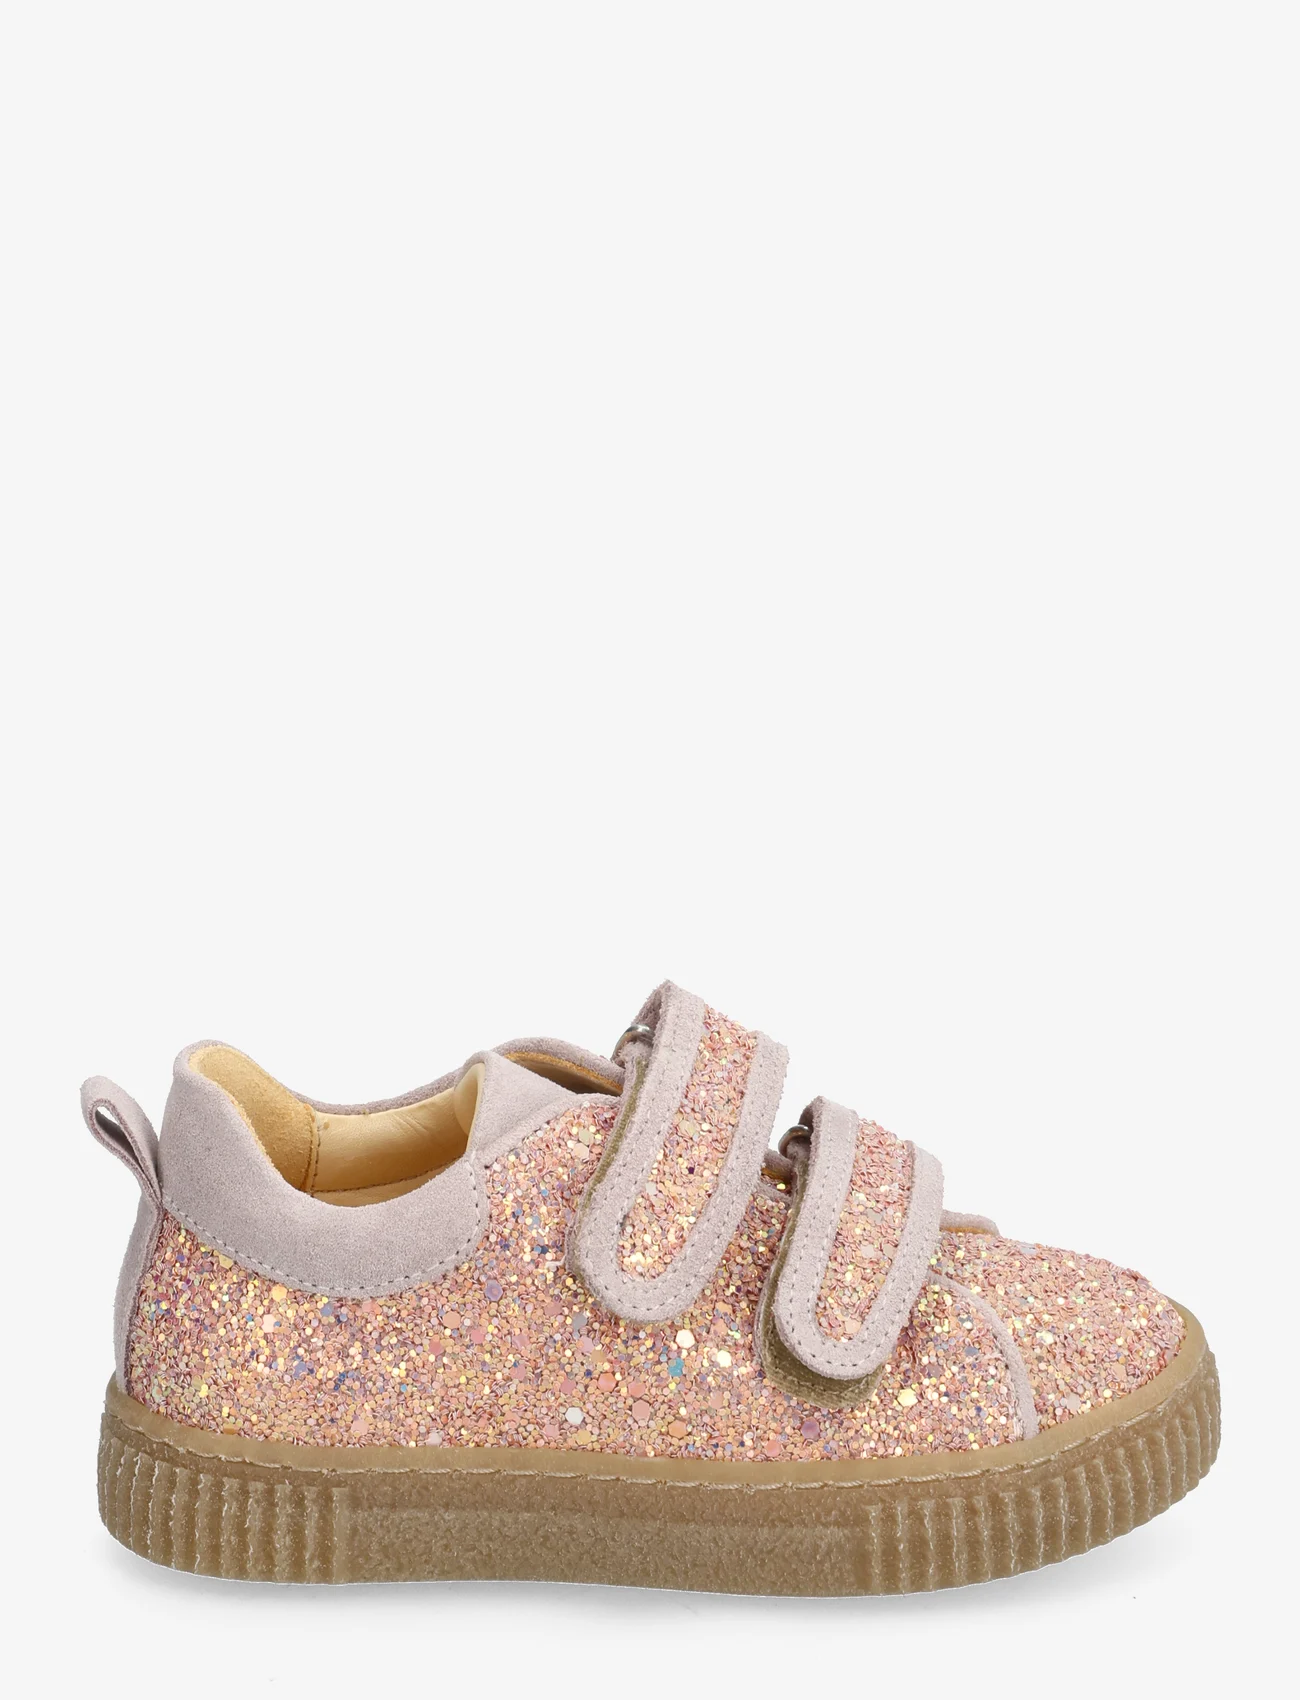 ANGULUS - Shoes - flat - with velcro - gode sommertilbud - 2750/2731 rose glitter/pale ro - 1